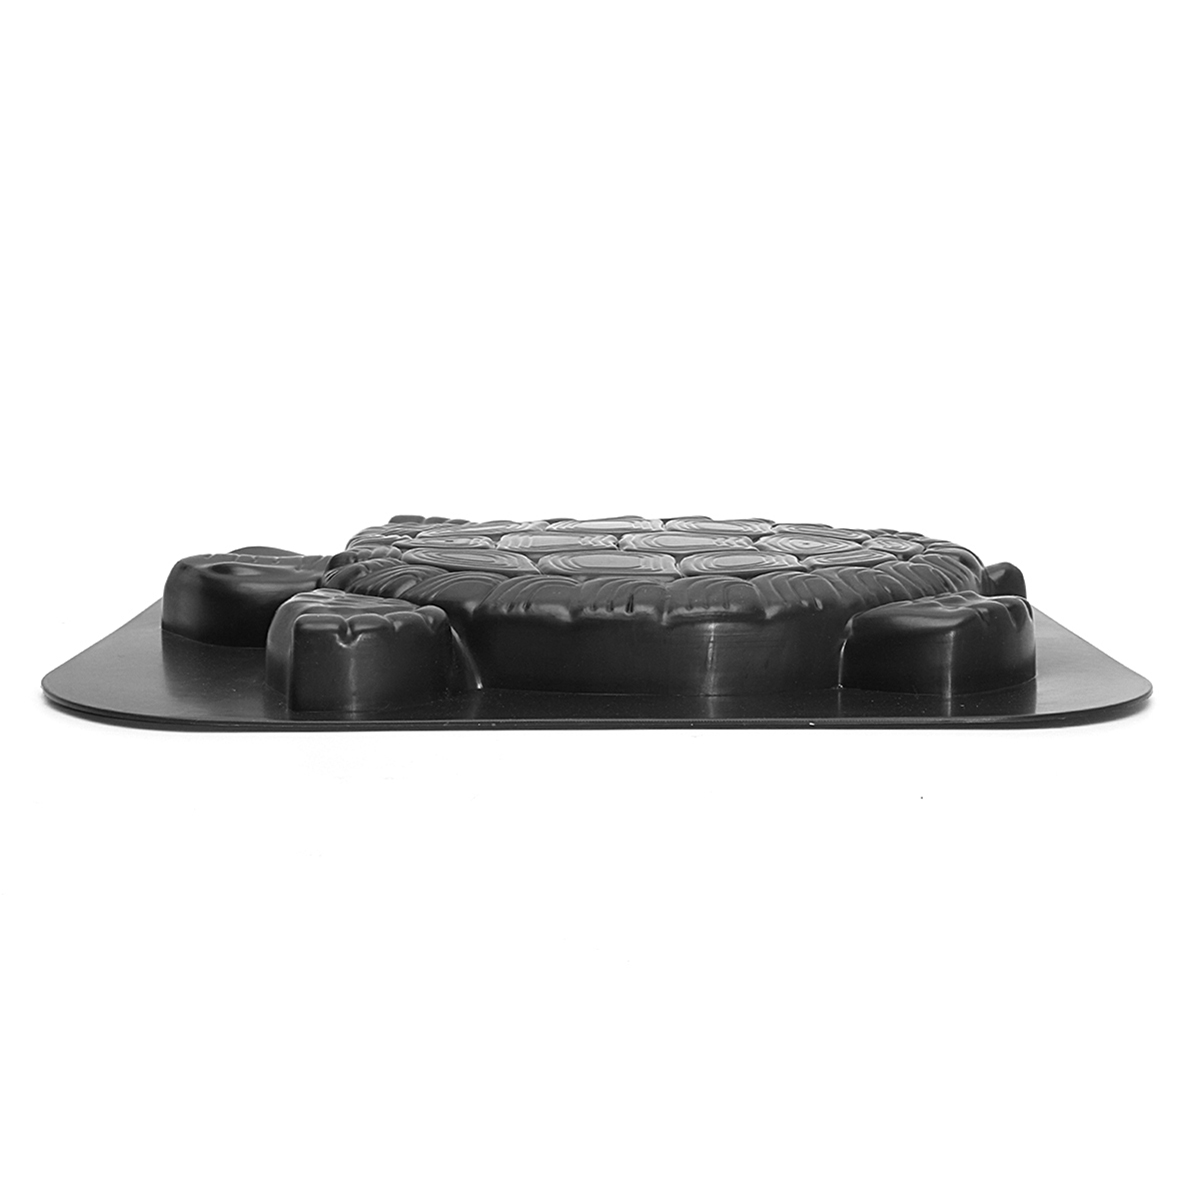 ABS Tortoise Turtle Stepping Stone Mold for Paving Garden Landscape